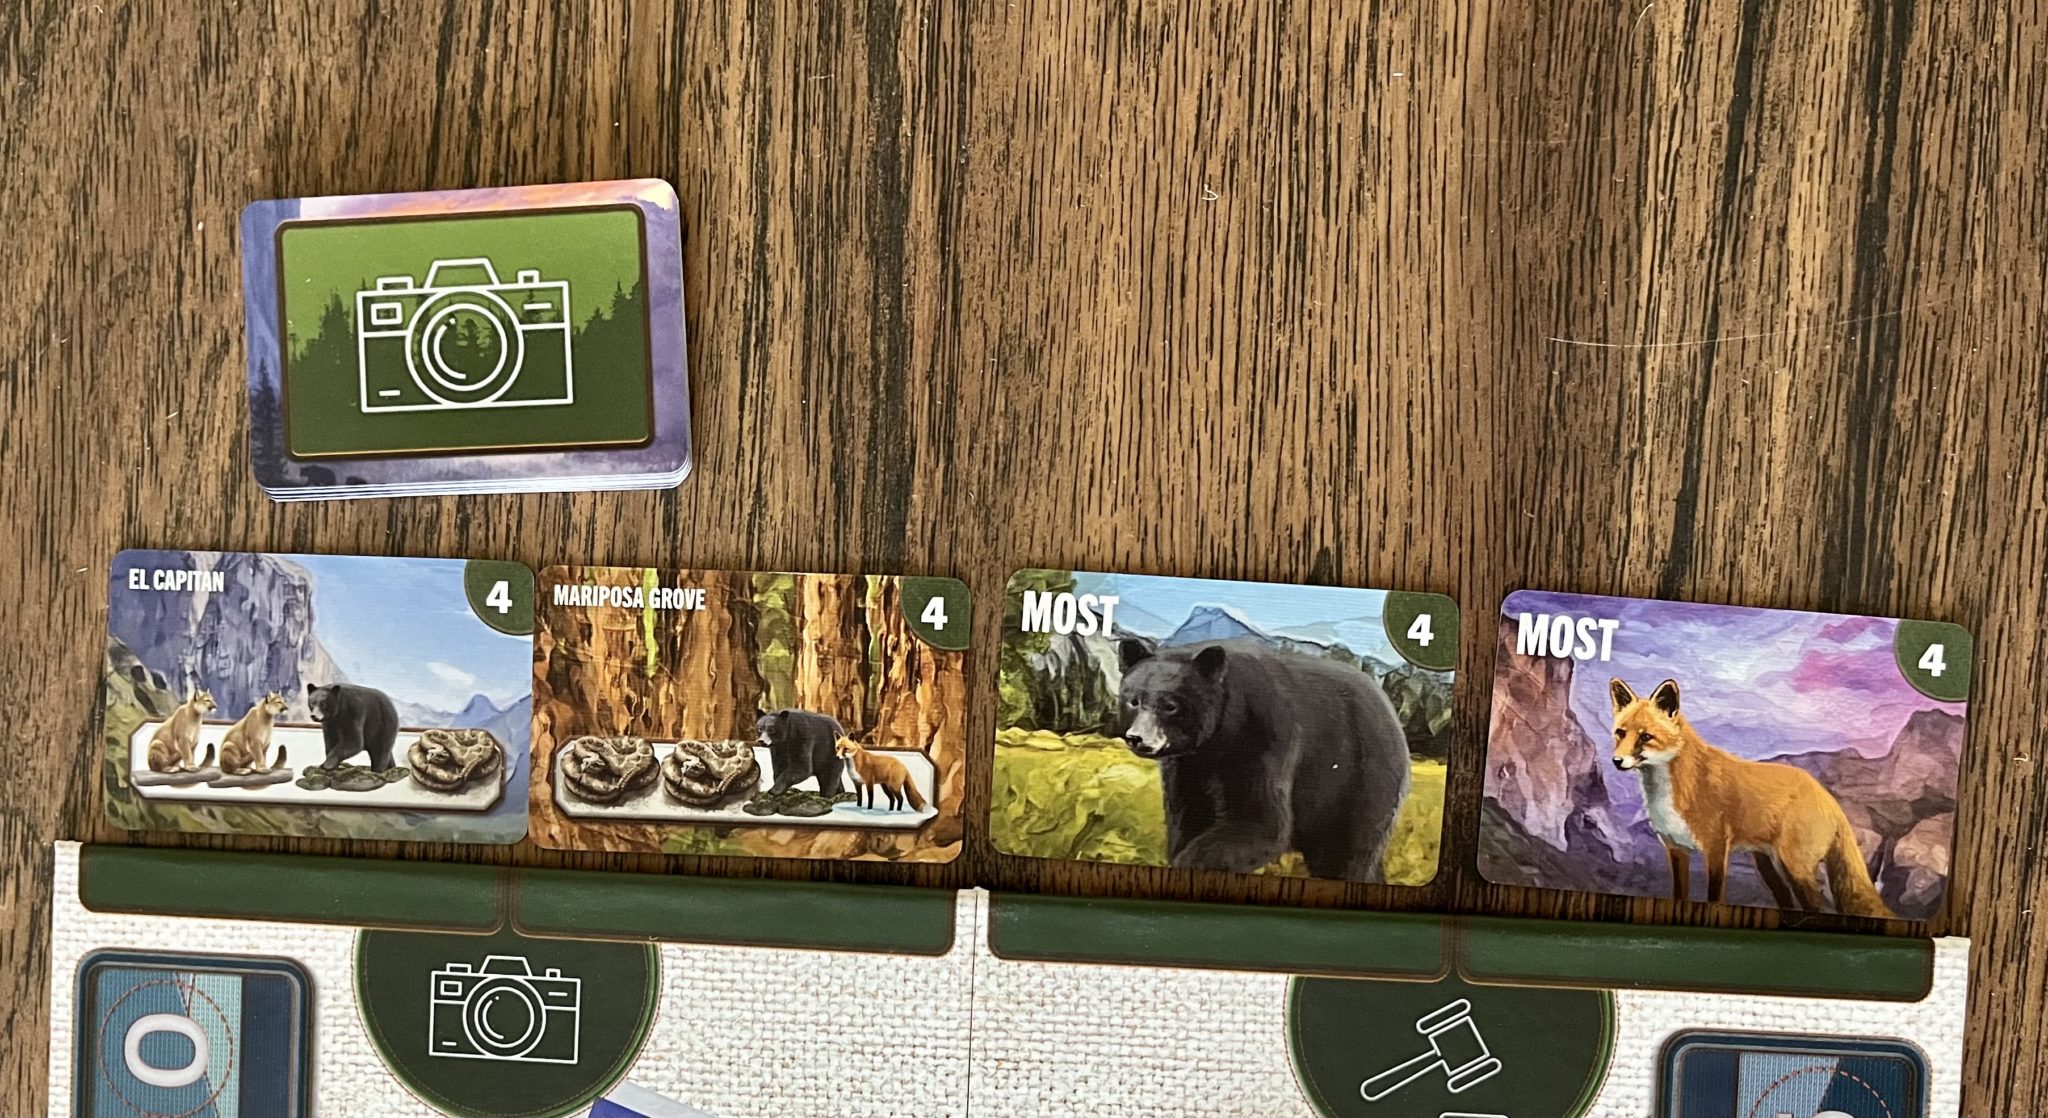 Yosemite Board Game photo cards and judge cards